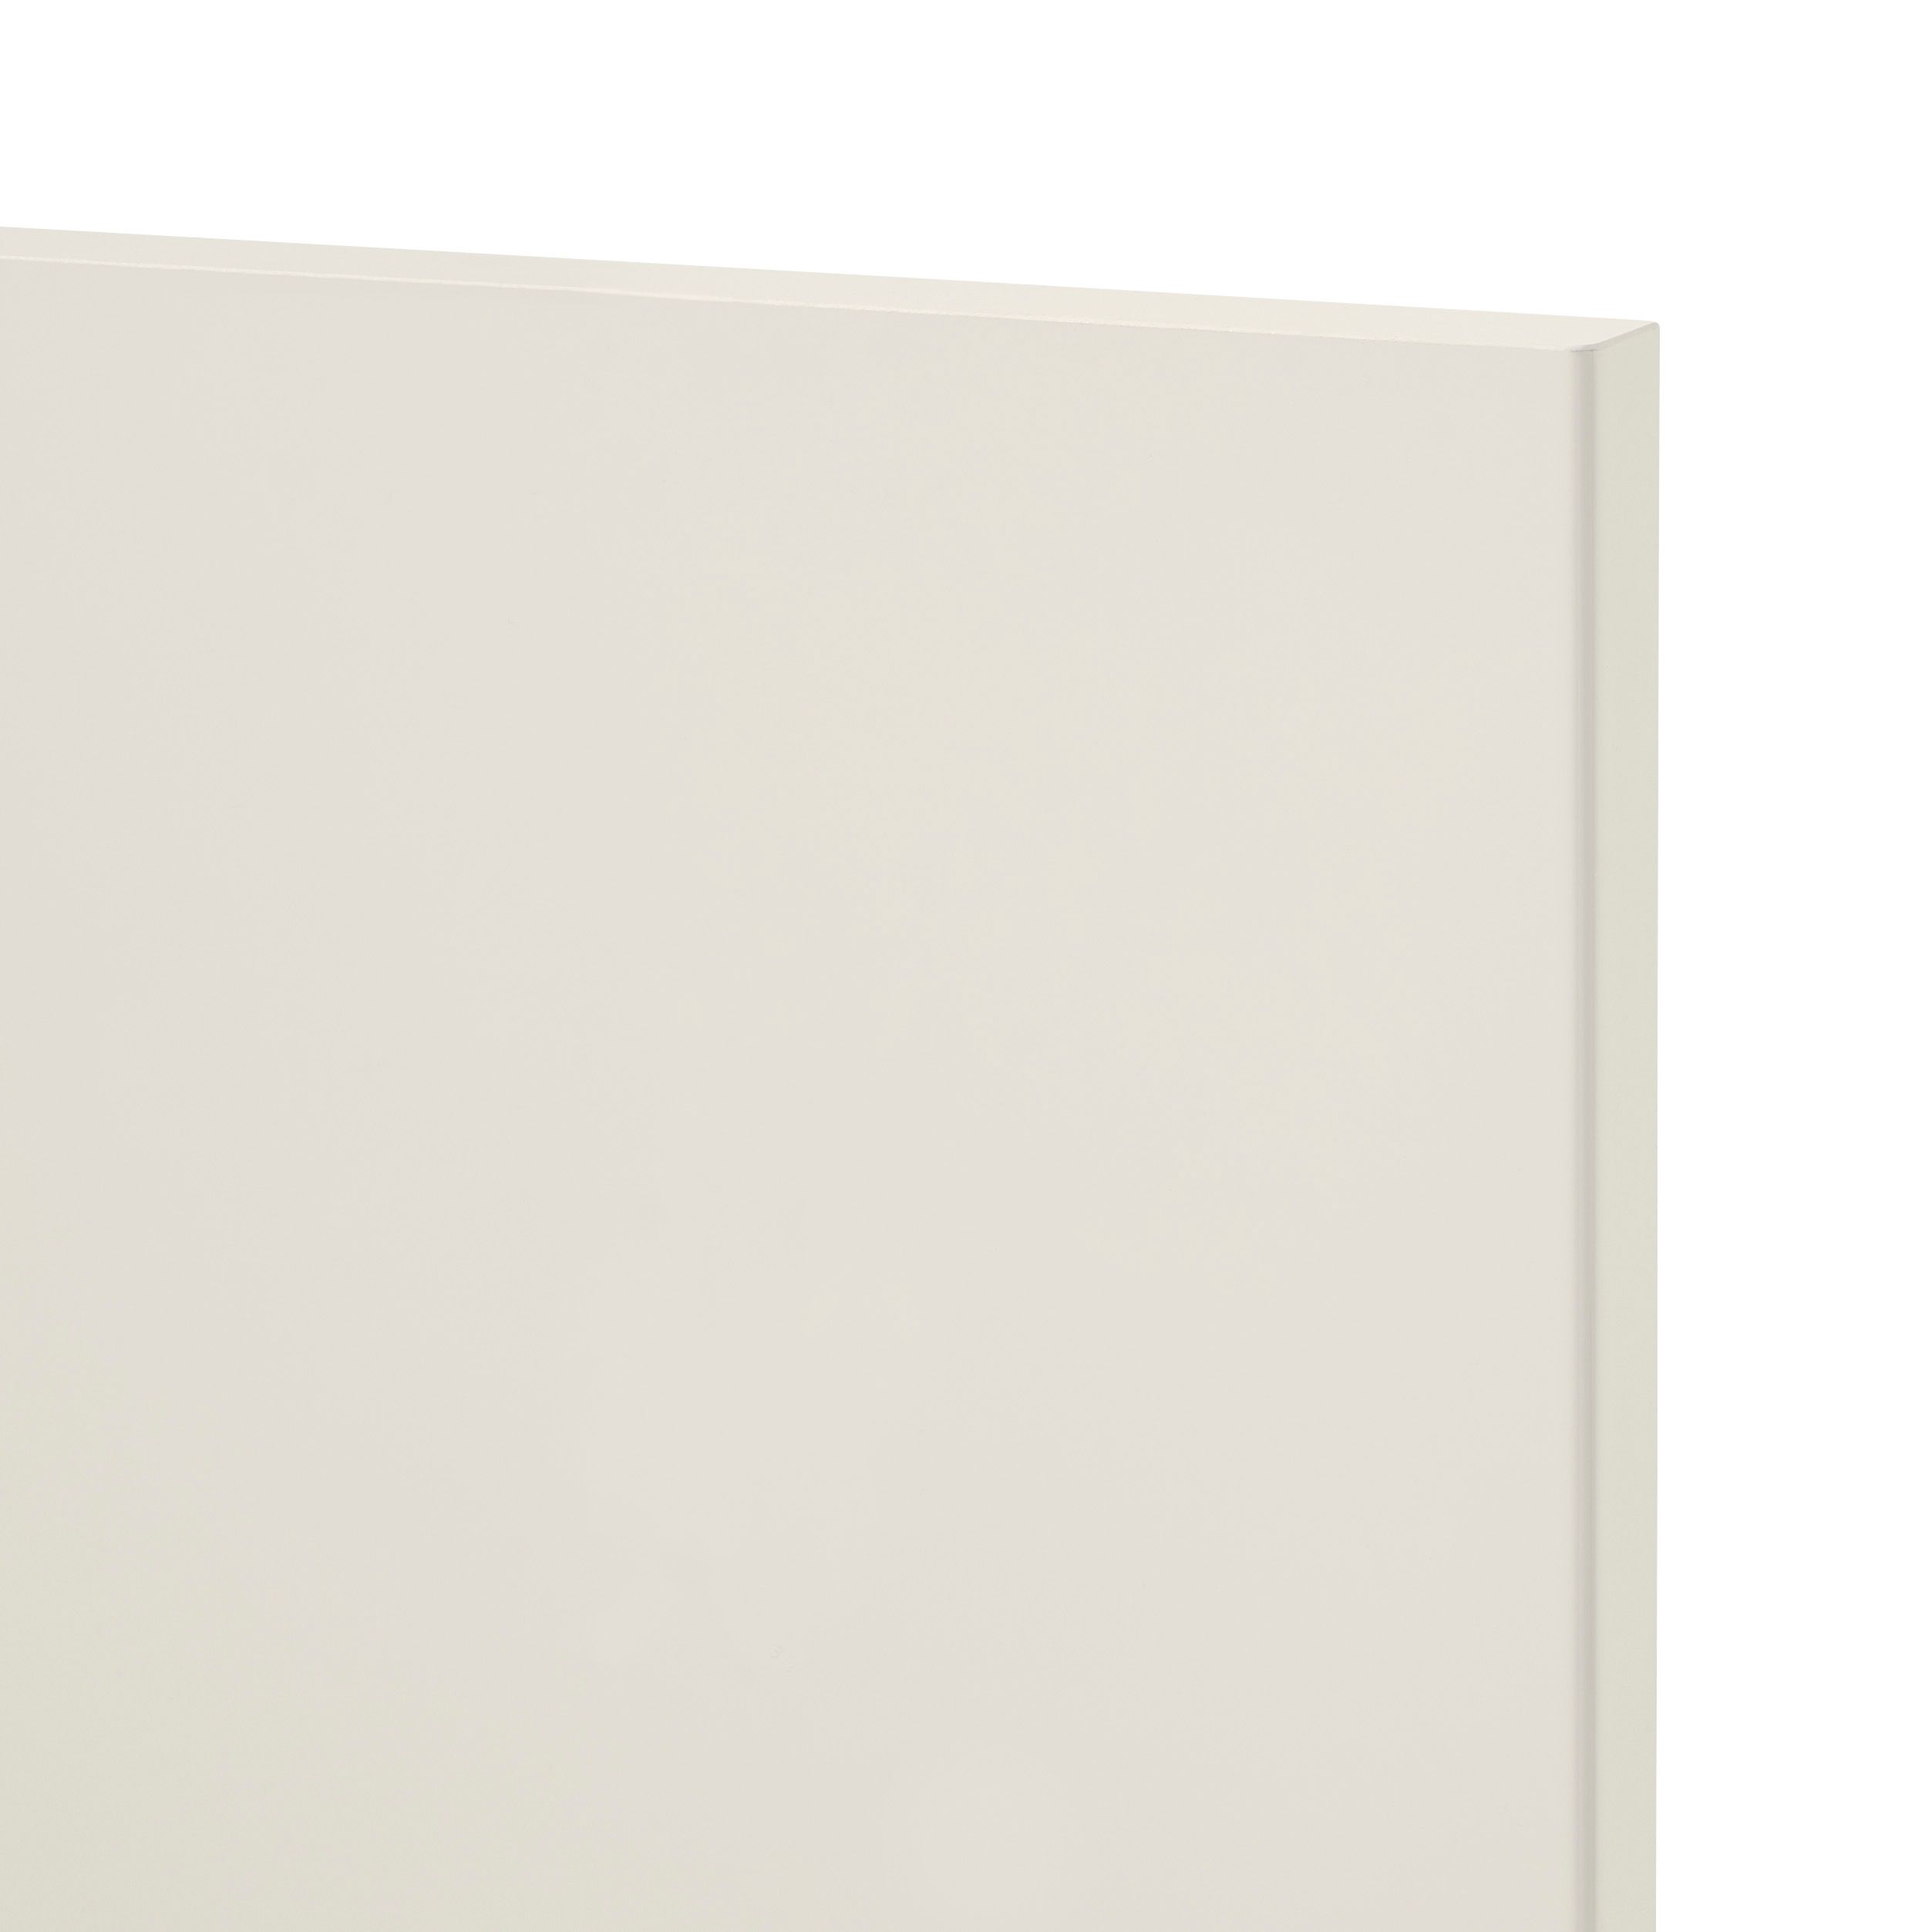 GoodHome Stevia Gloss cream slab Drawer front (W)800mm, Pack of 3